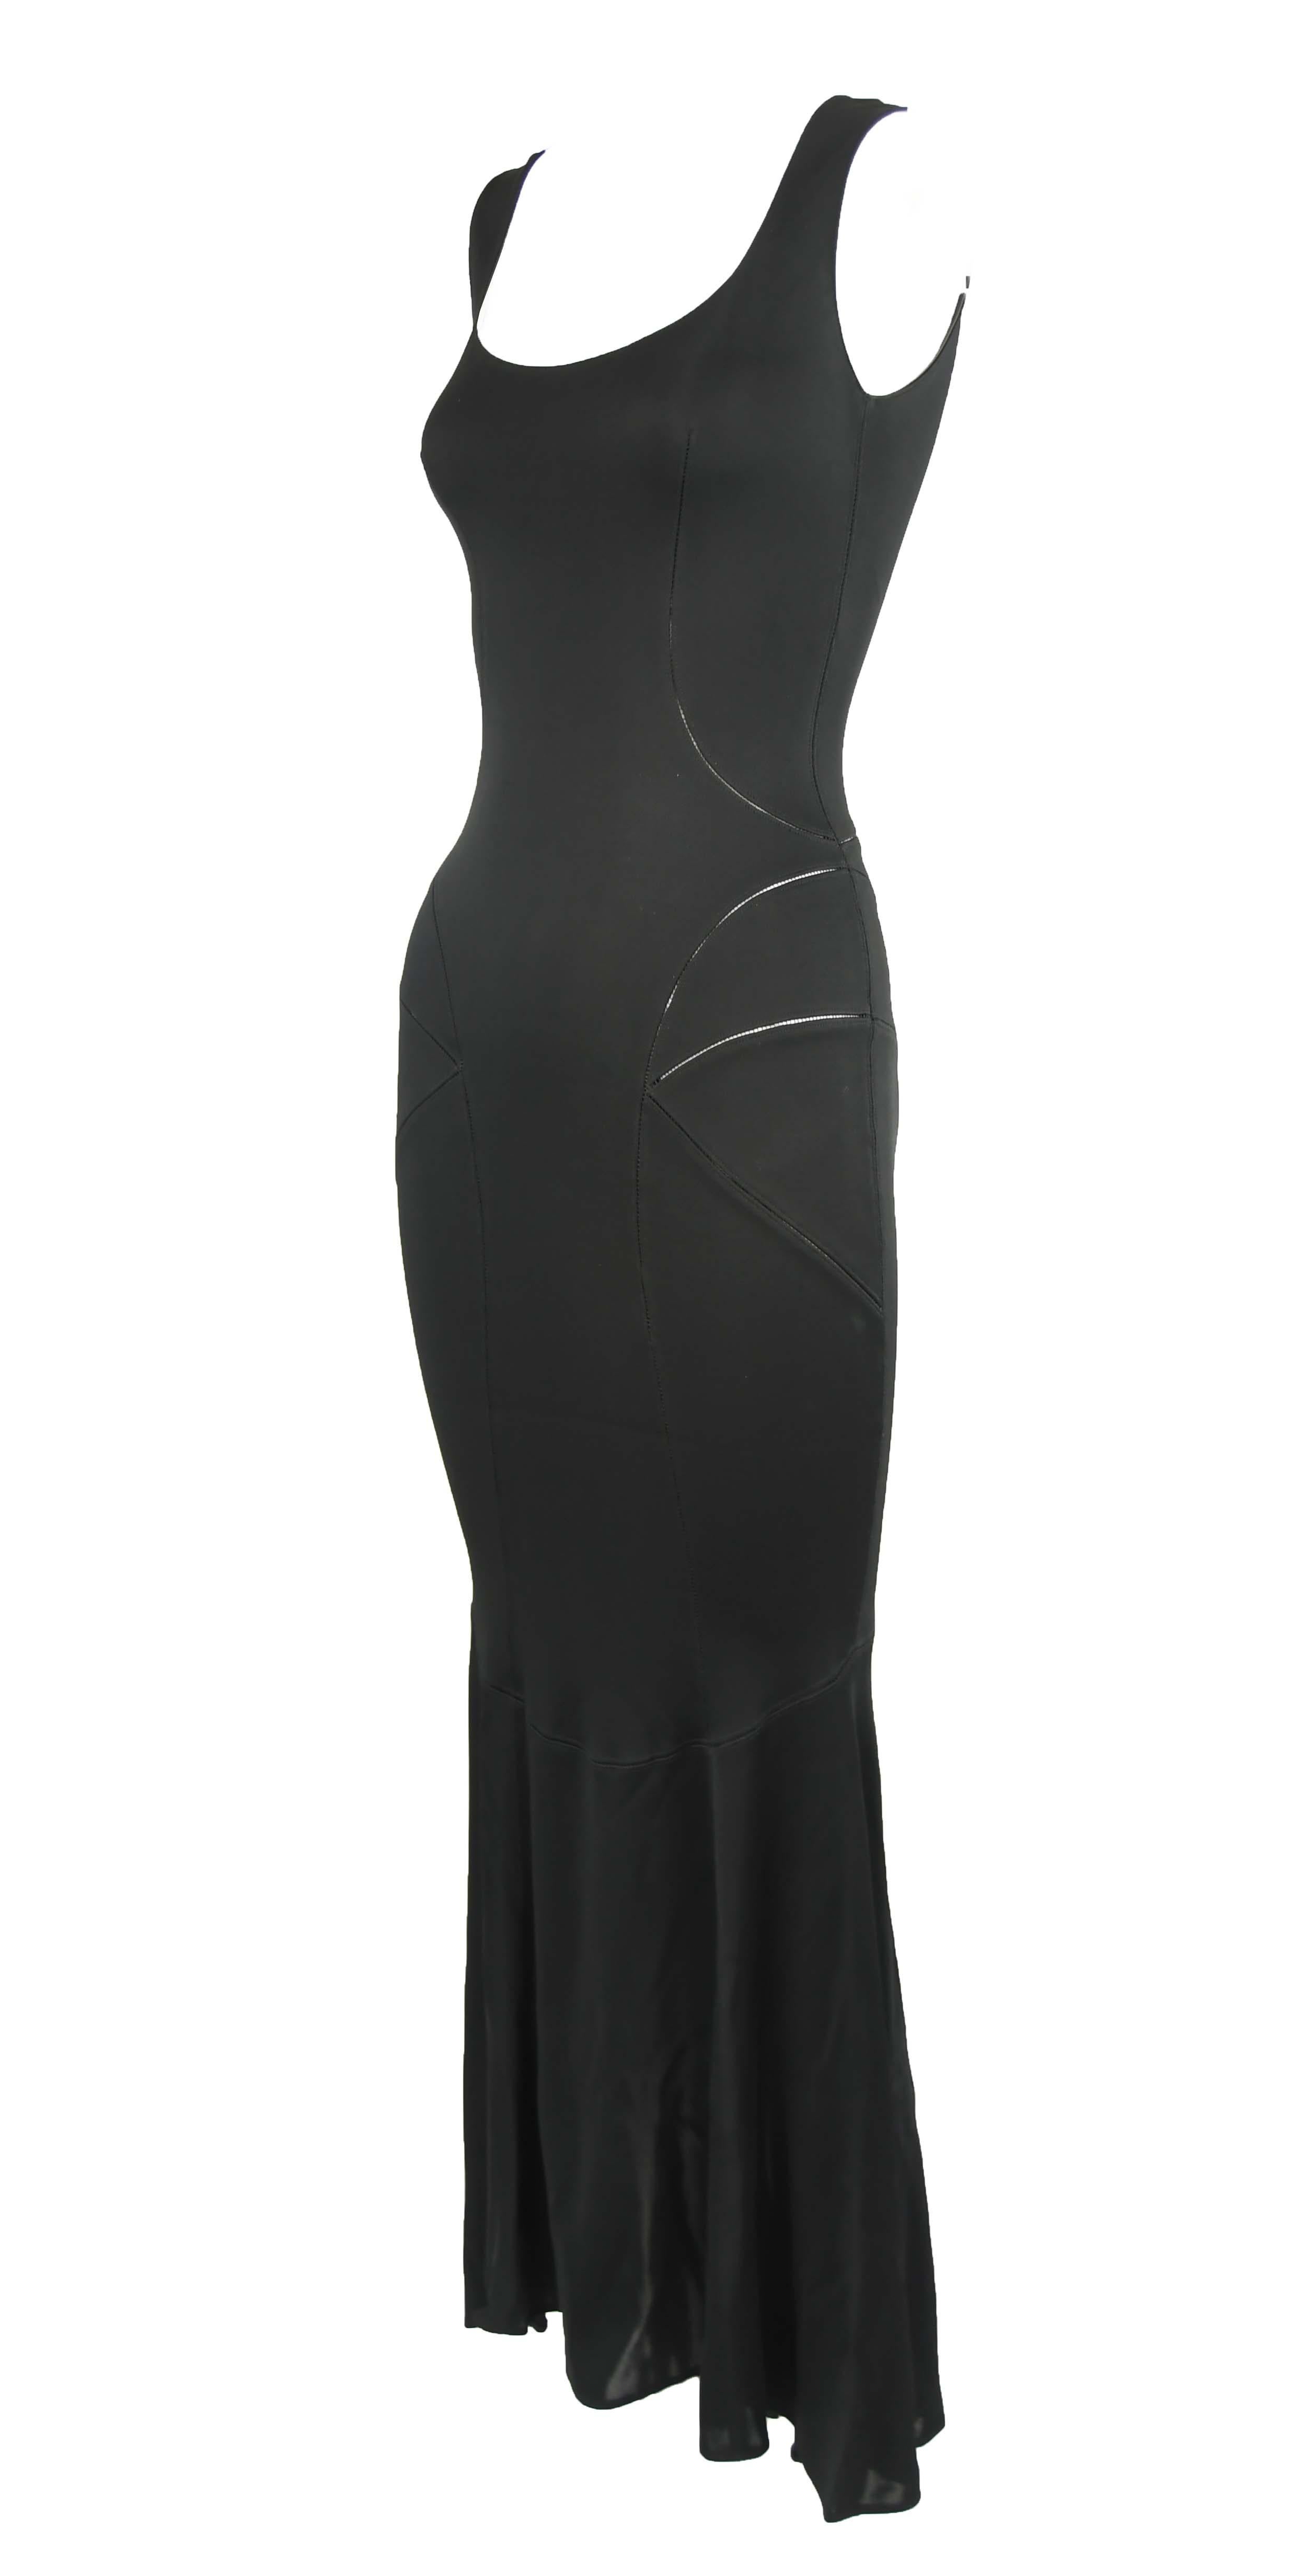 Vintage Alaia sleeveless black tea length gown.  Stunning seams that show a slight bit of skin.  Makes for the perfect wardrobe essential.

Size: S

Condition: Pristine vintage condition

Composition: 100% viscose

Care: Dry clean only

Made in Italy